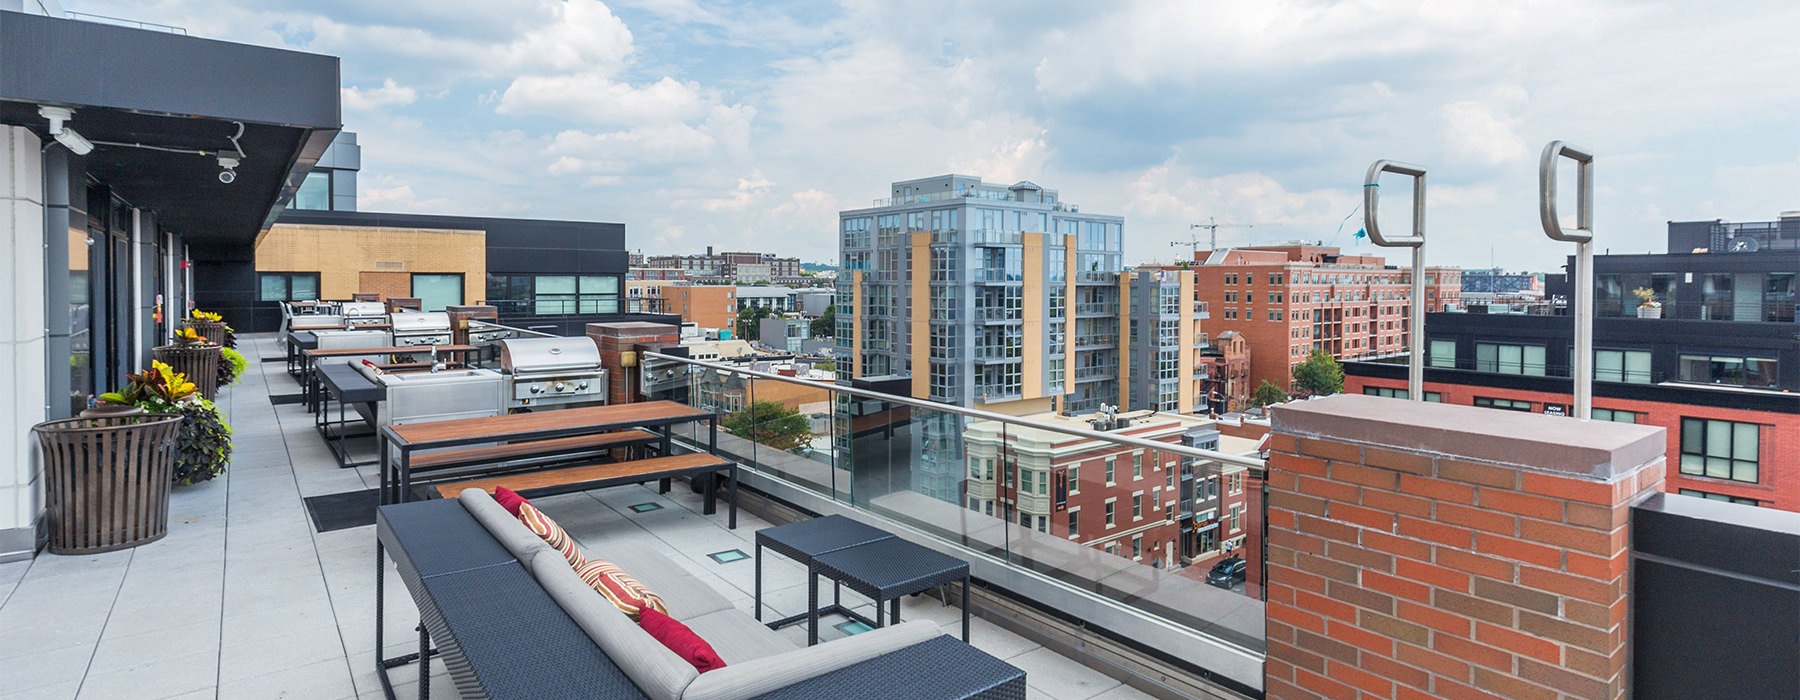 Rooftop Lounge with views